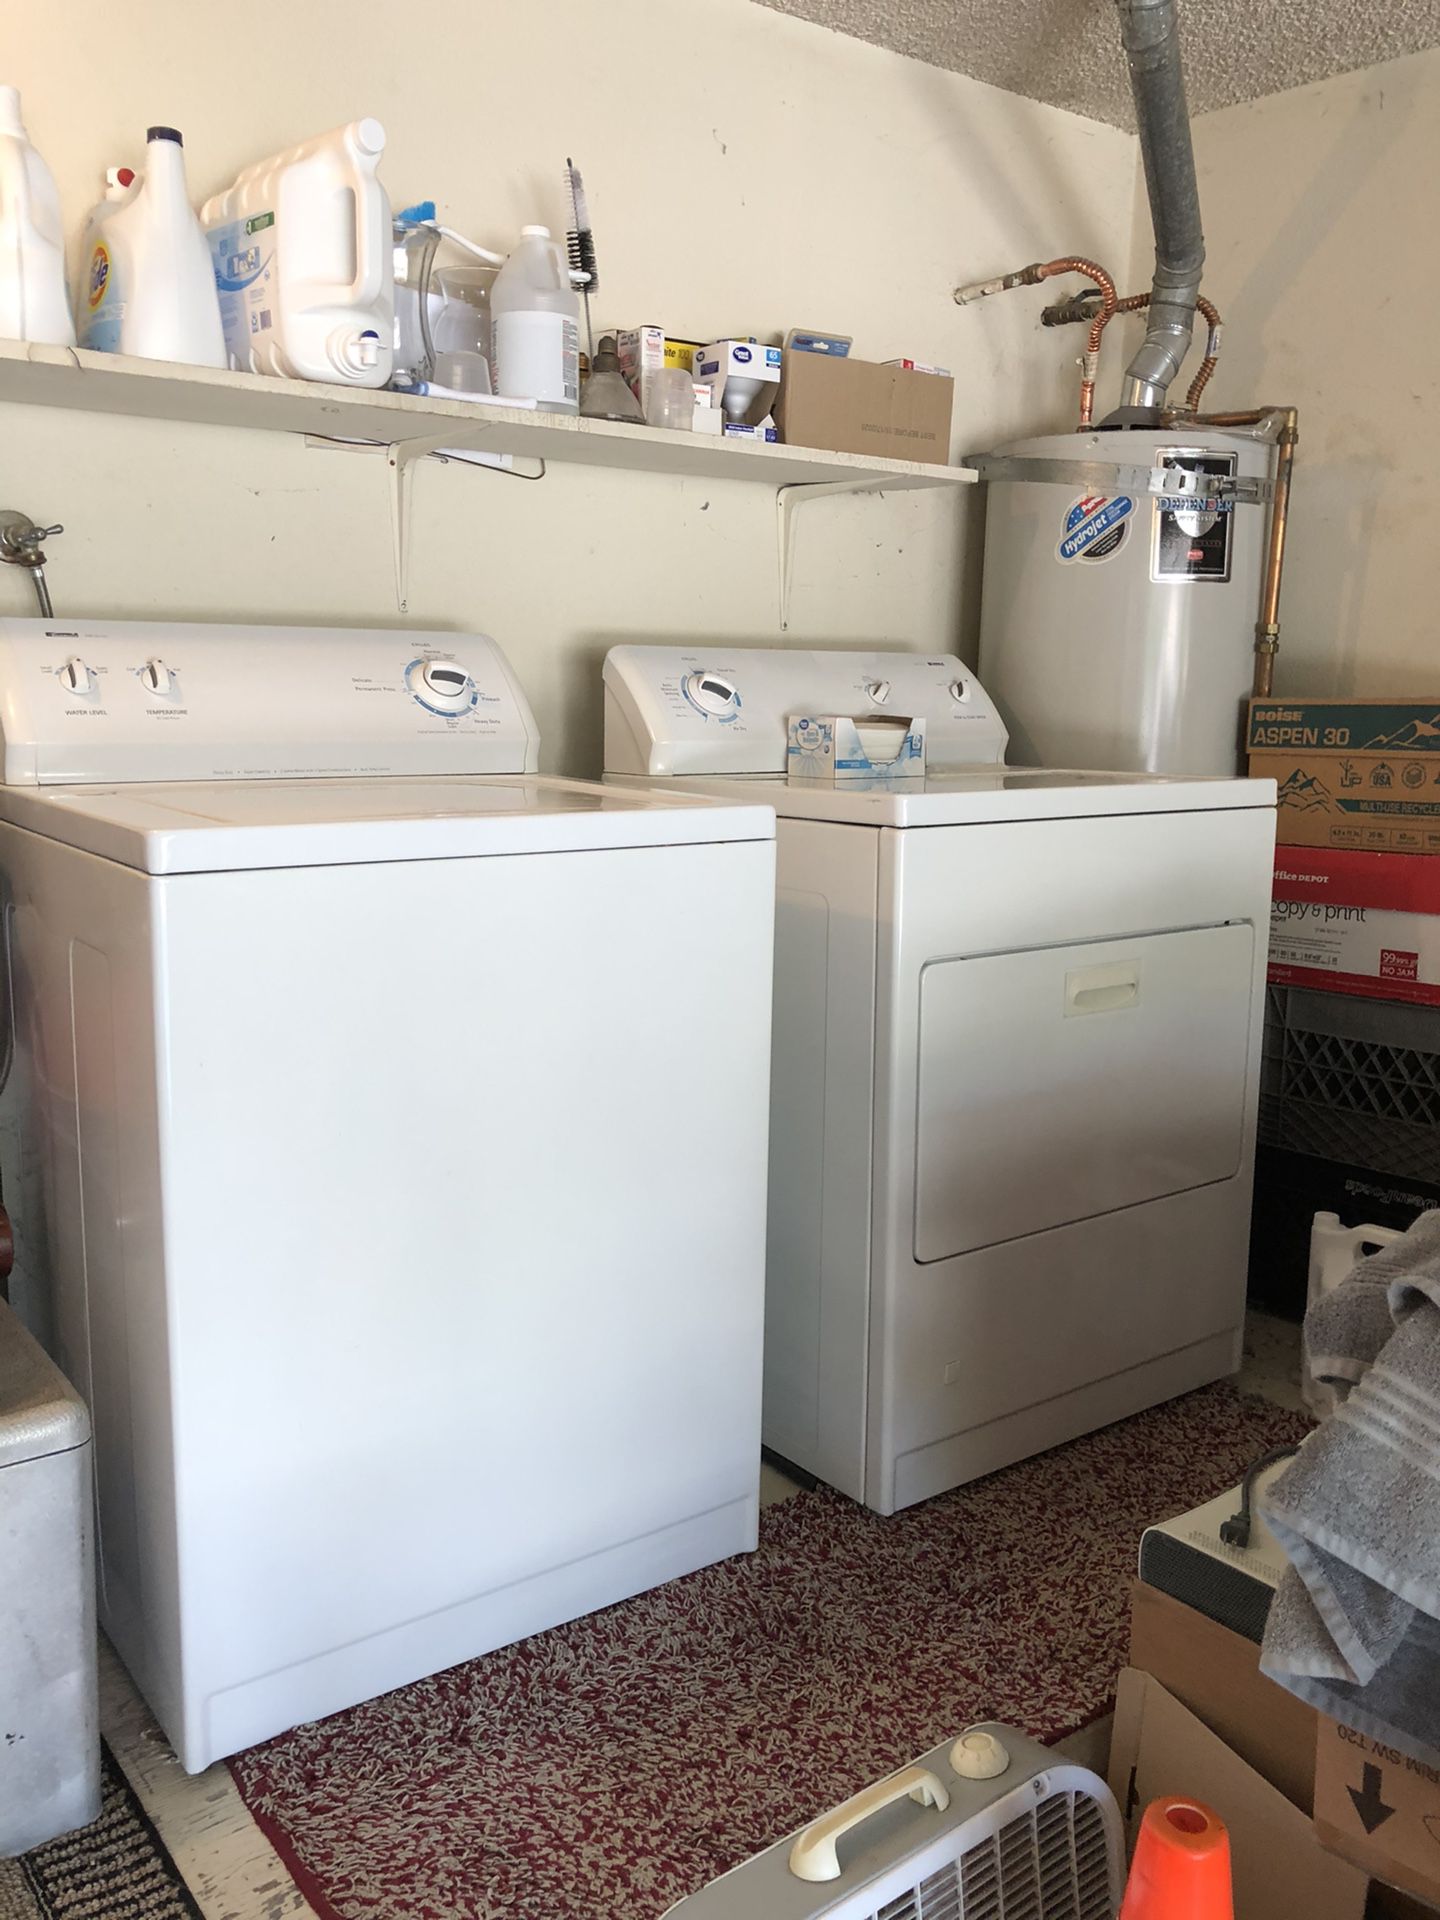 Kenmore washer and gas dryer 500 series